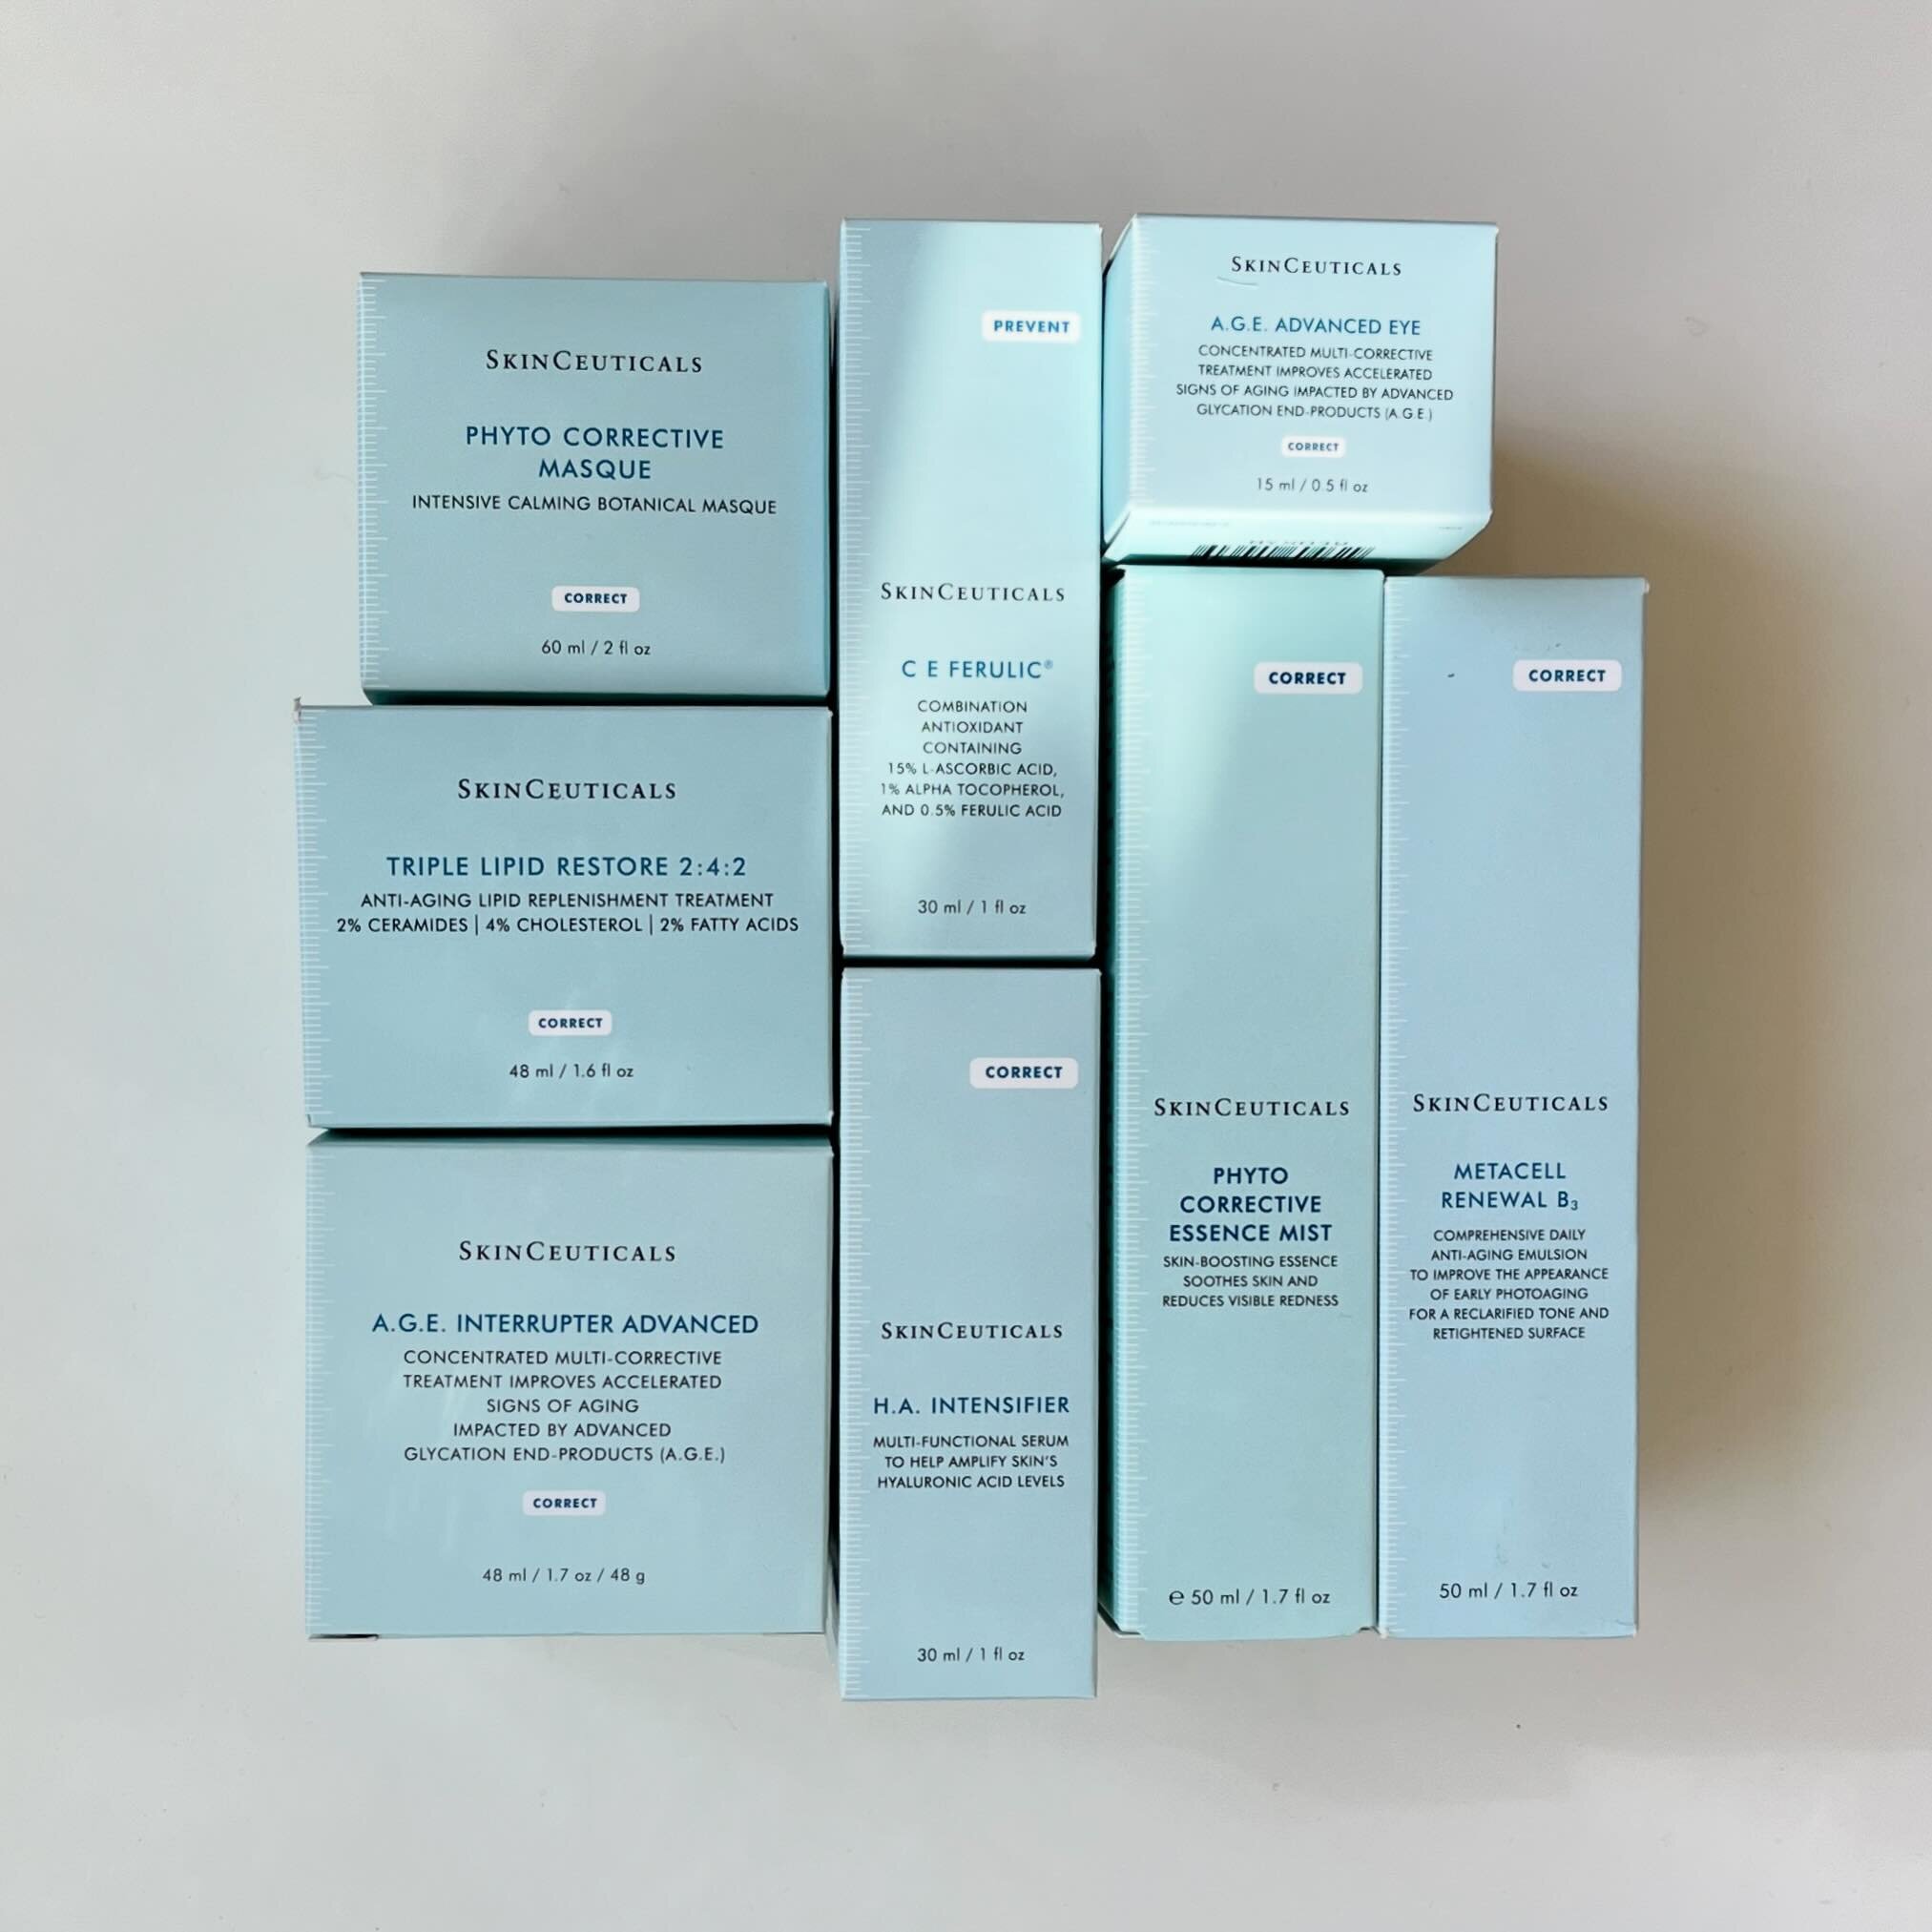 Year after year, Skin Ceuticals takes the lead when it comes to antioxidant protection from photo damage, building density and firmness and strengthening the collagen and elastin matrix. I am so proud to be celebrating a 20 year partnership with this